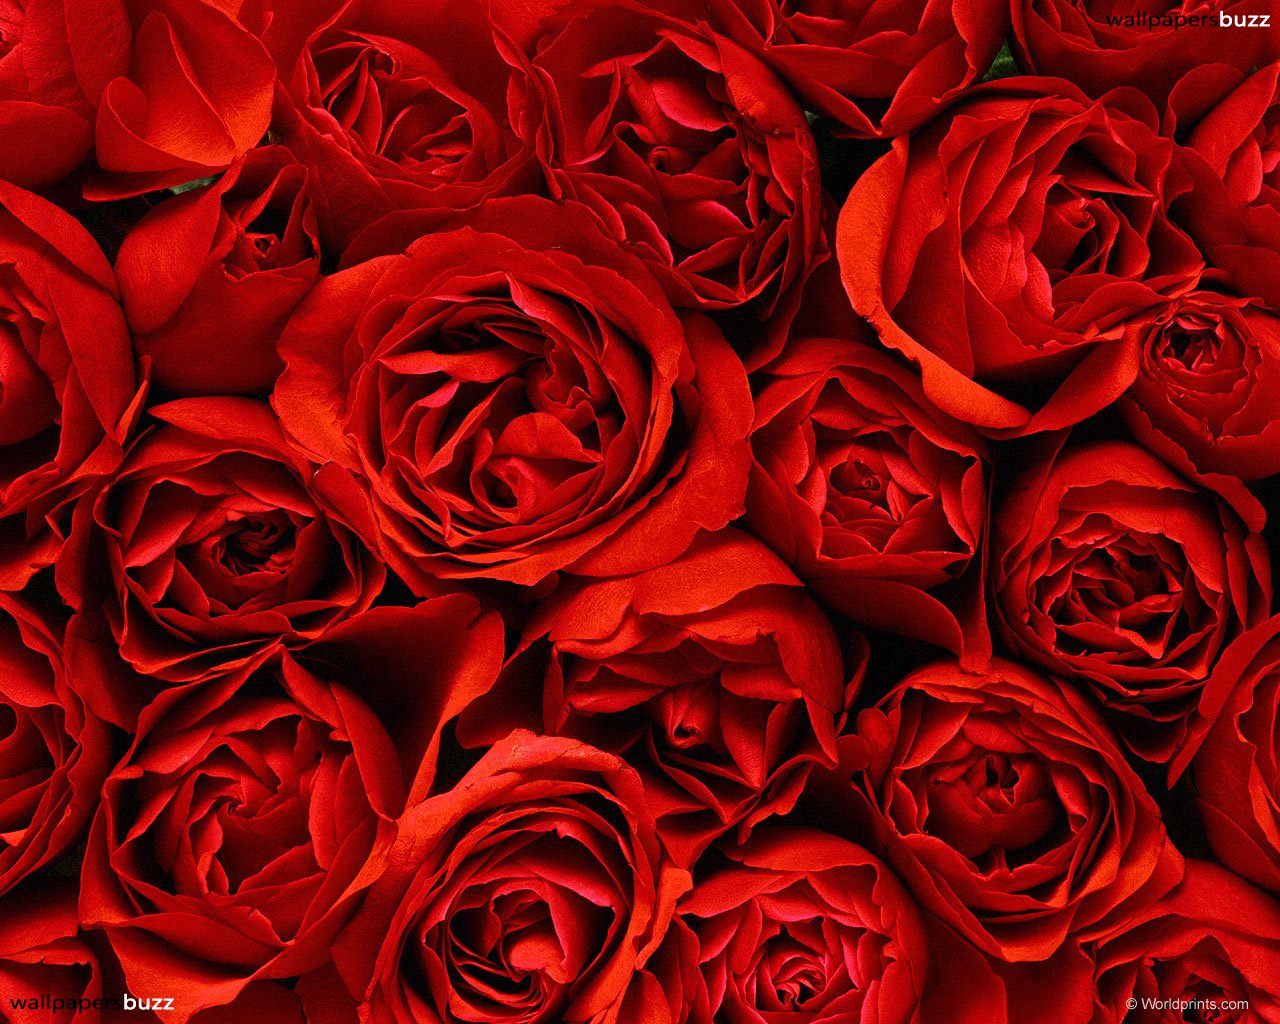 Popular Rose Wallpaper Beautiful Red Pictures